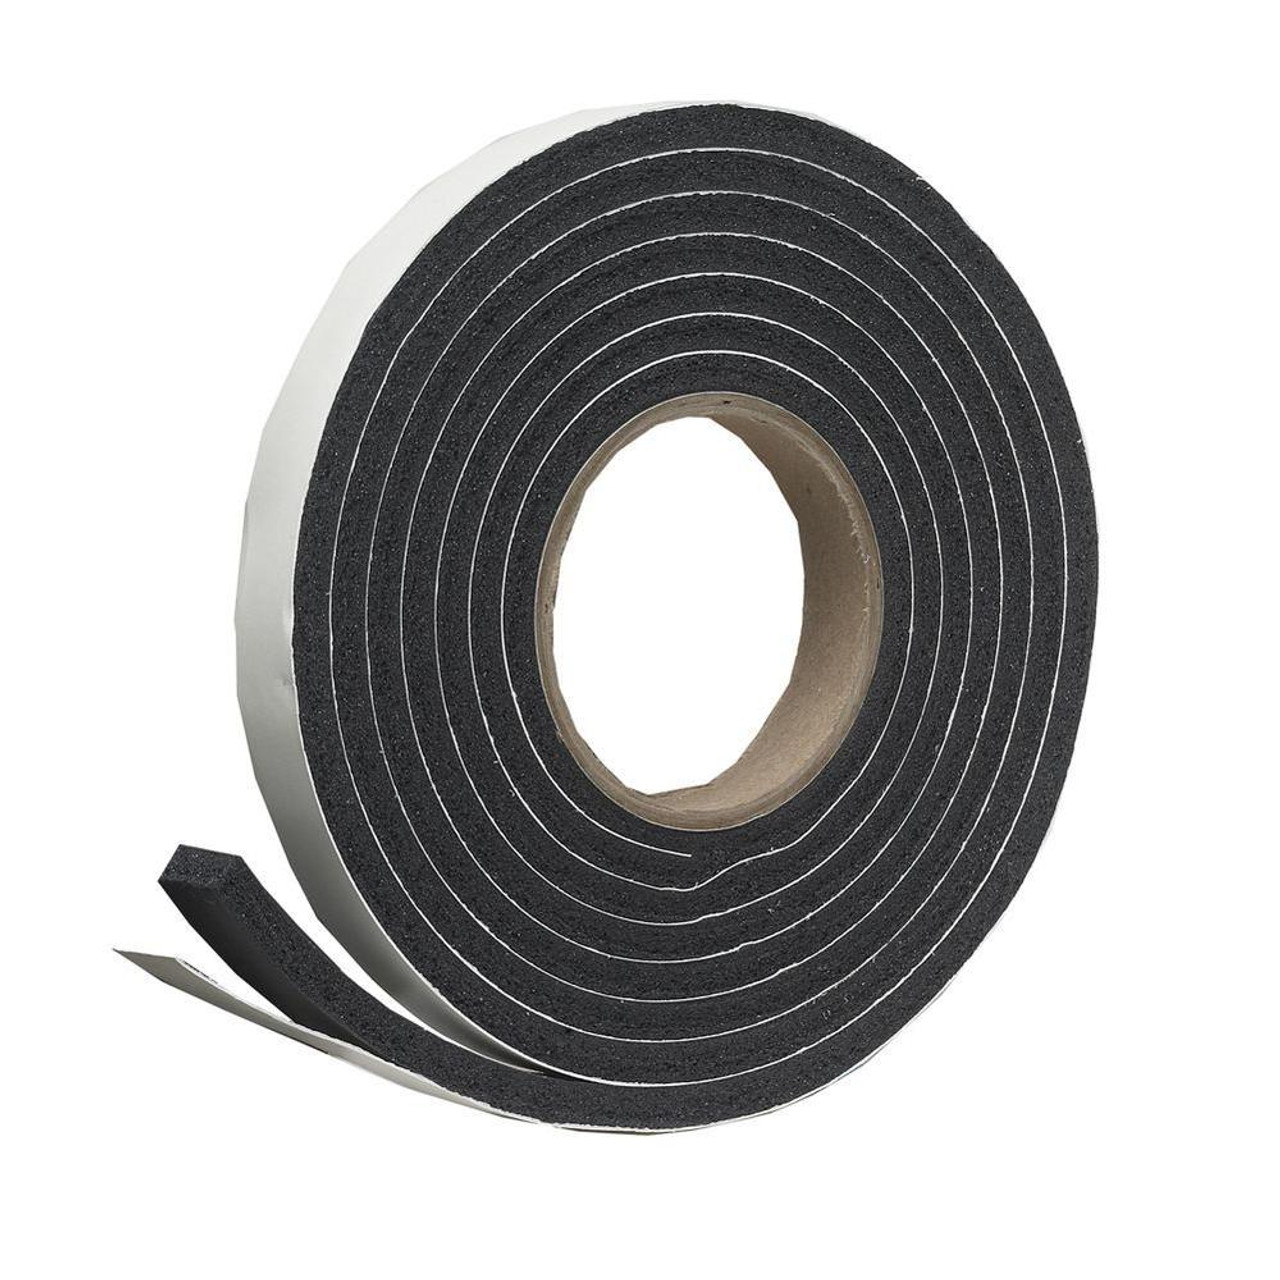 3/8 X 1 1/4 FOAM ADHESIVE GASKET - BY THE FOOT - Keep Your Cool! -  GasketGuy.com